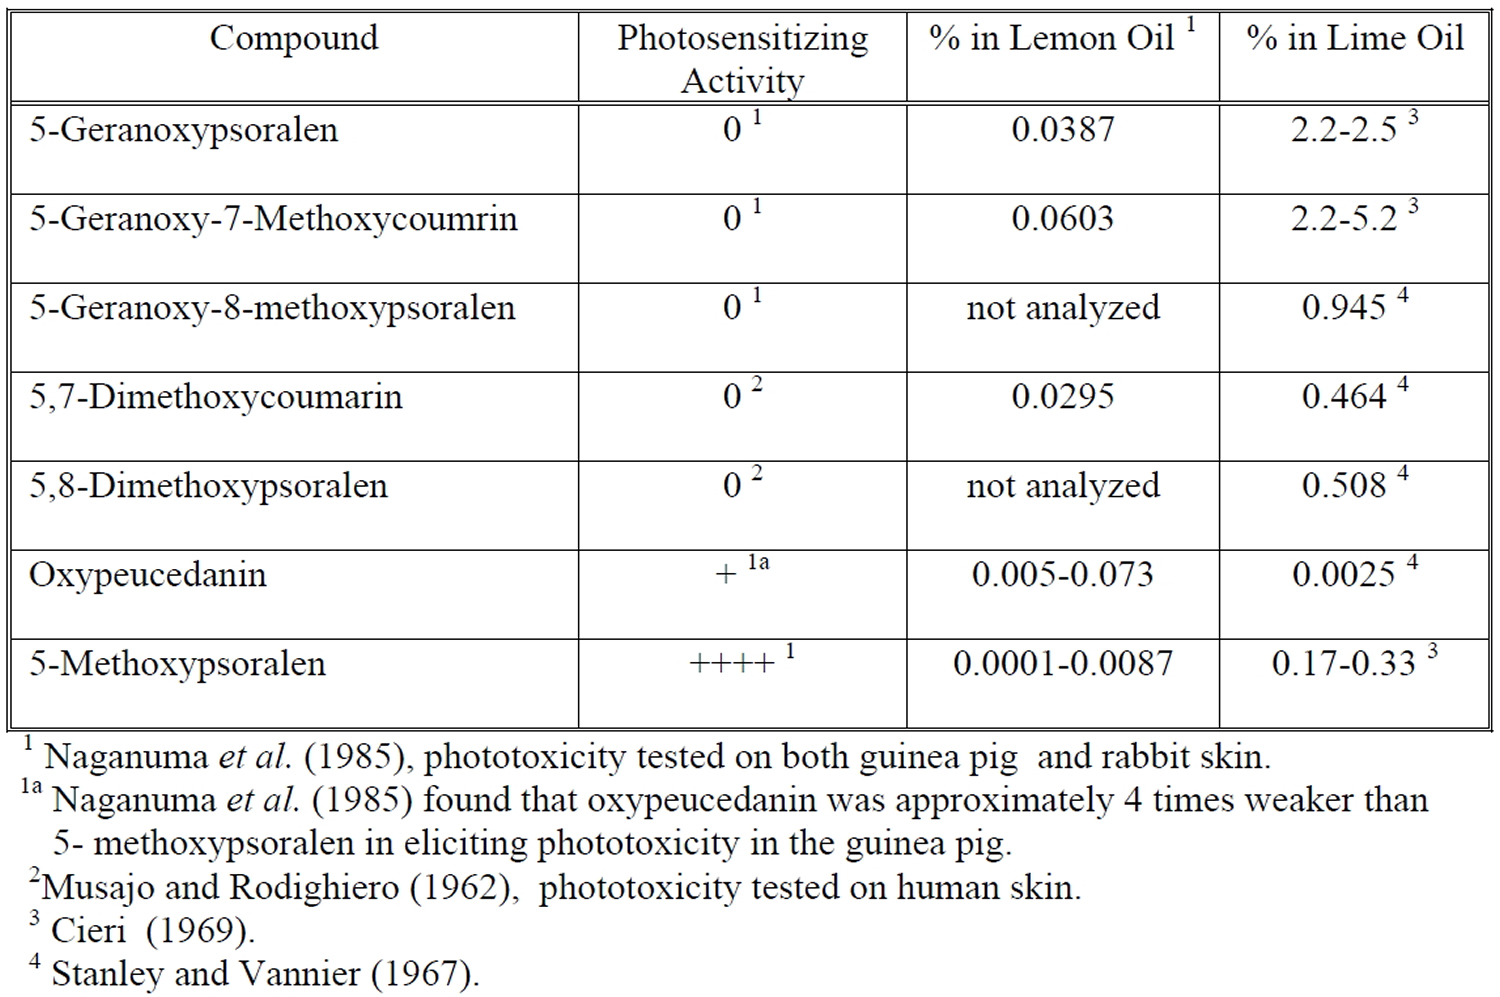 Levels of Major Coumarins and Furocoumarins in Lemon Oil